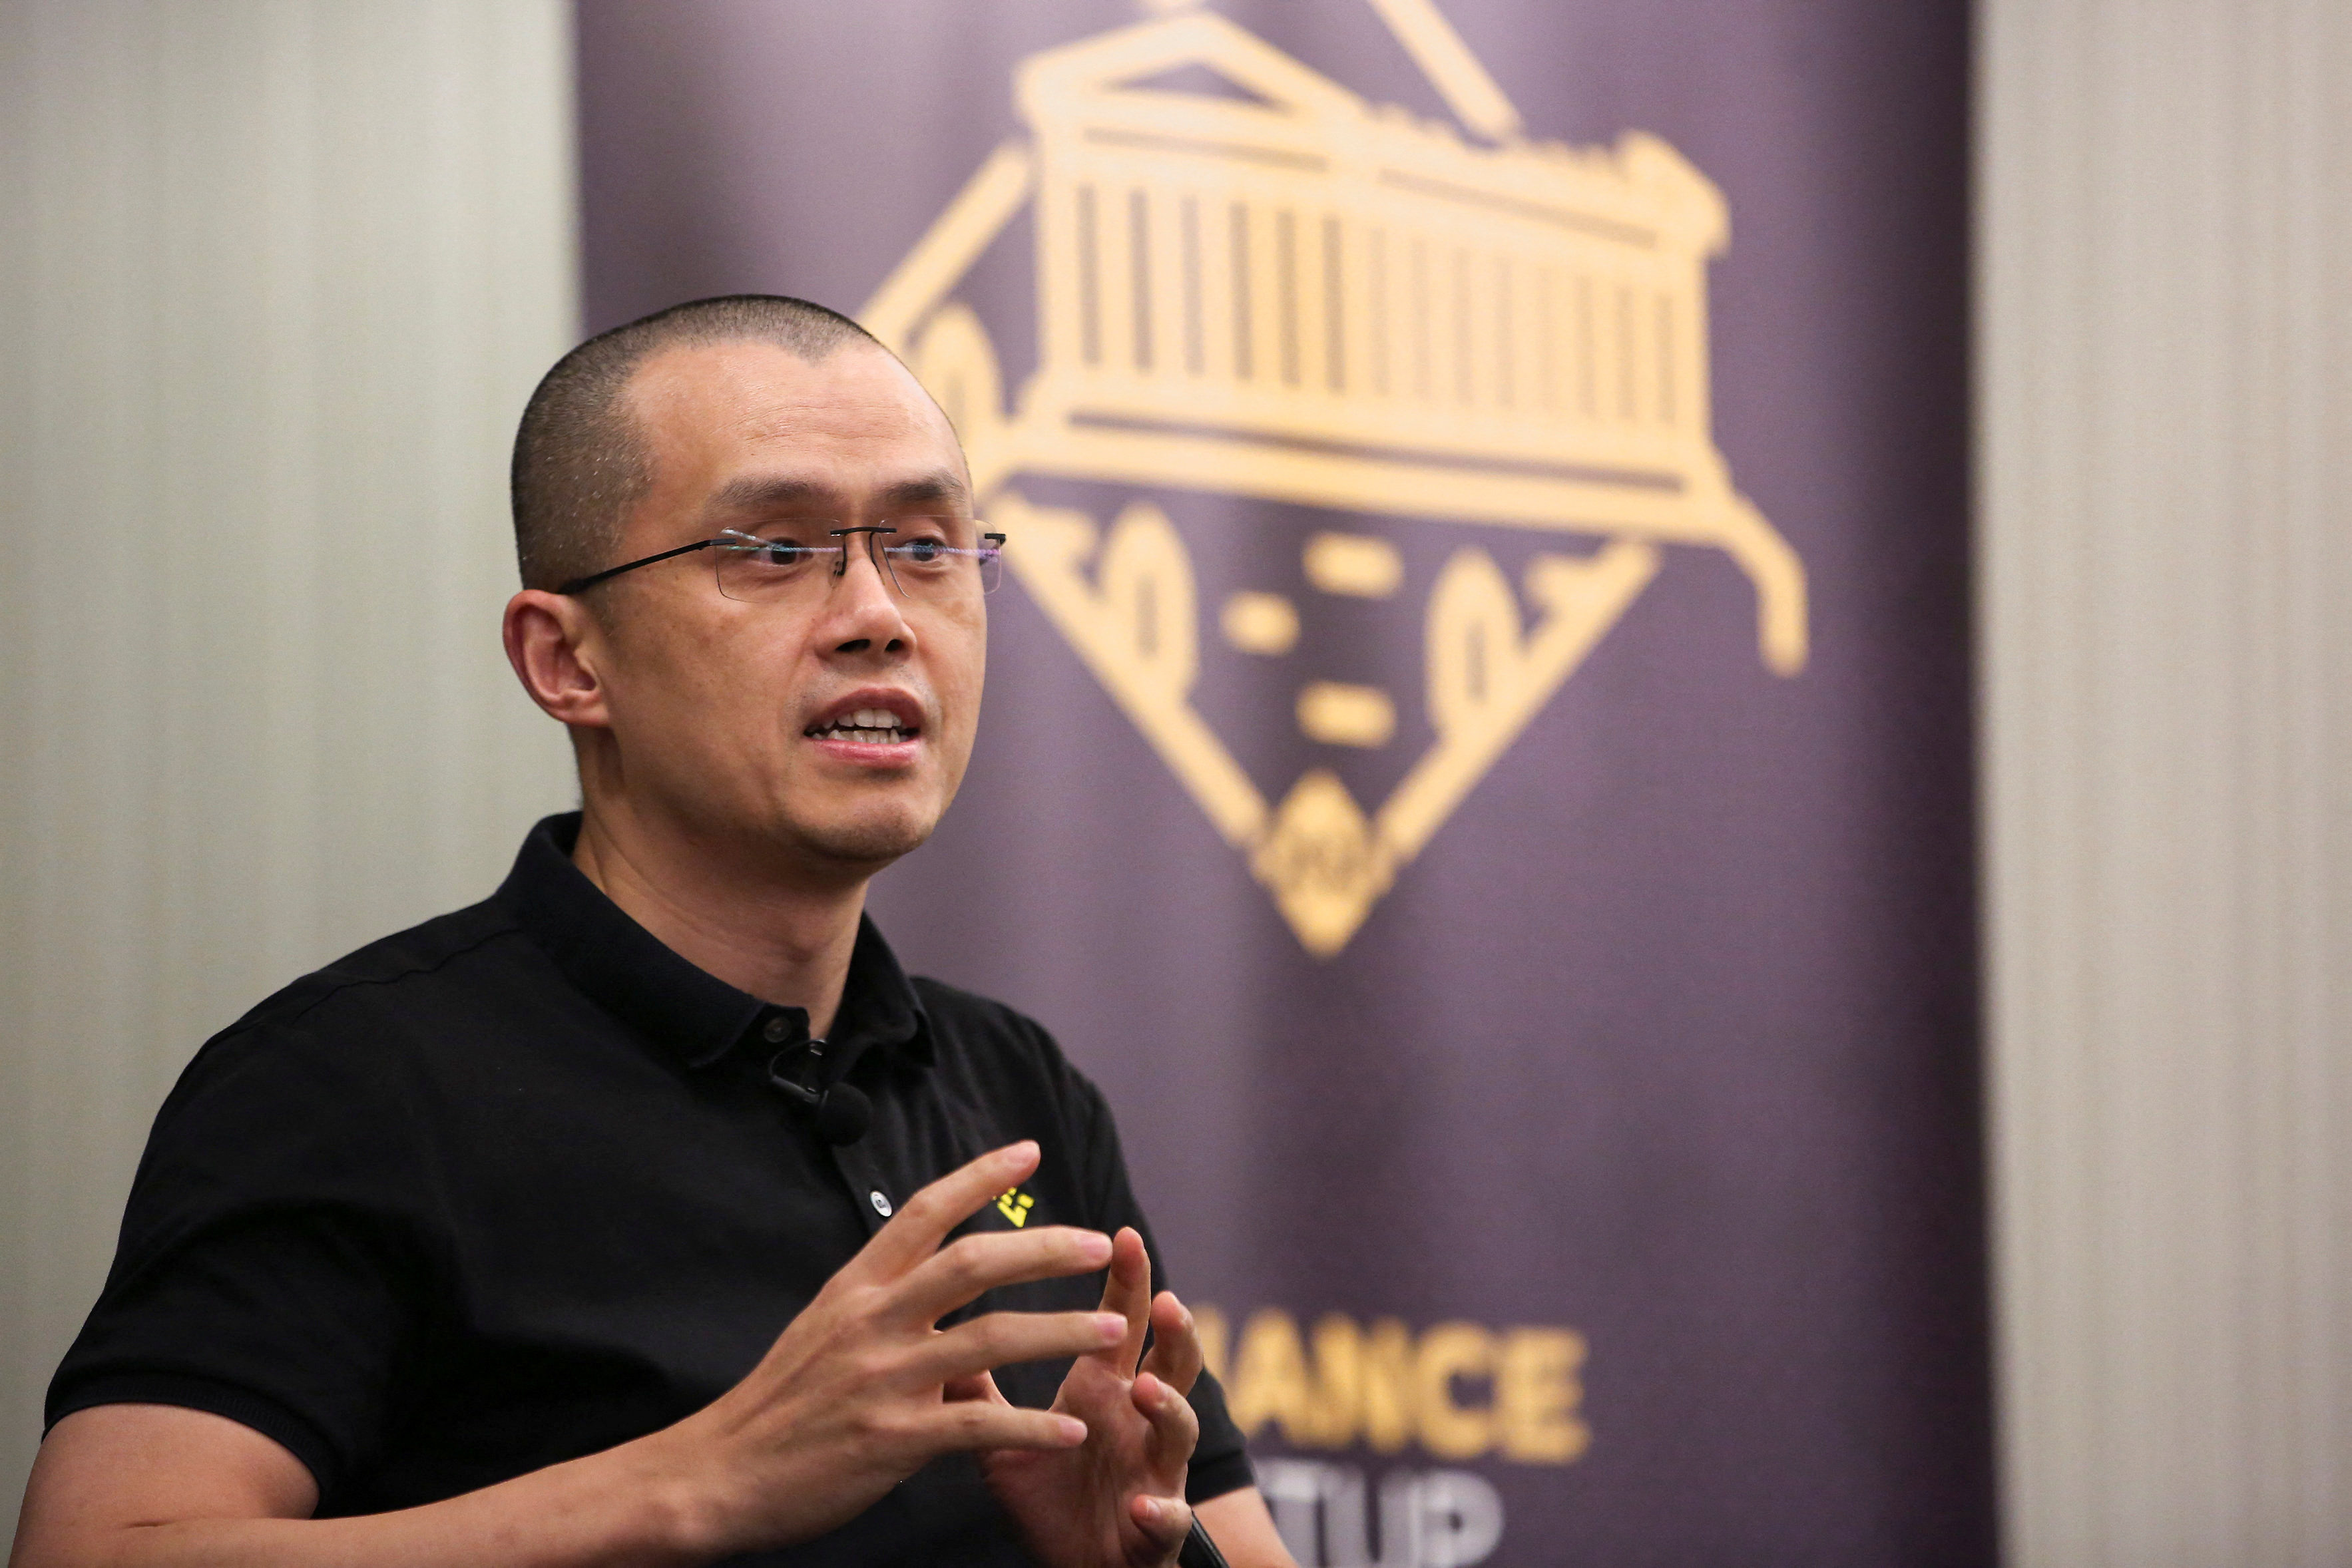 Zhao Changpeng, founder and chief executive officer of Binance, speaks during an event in Athens, Greece, on November 25, 2022. Photo Reuters